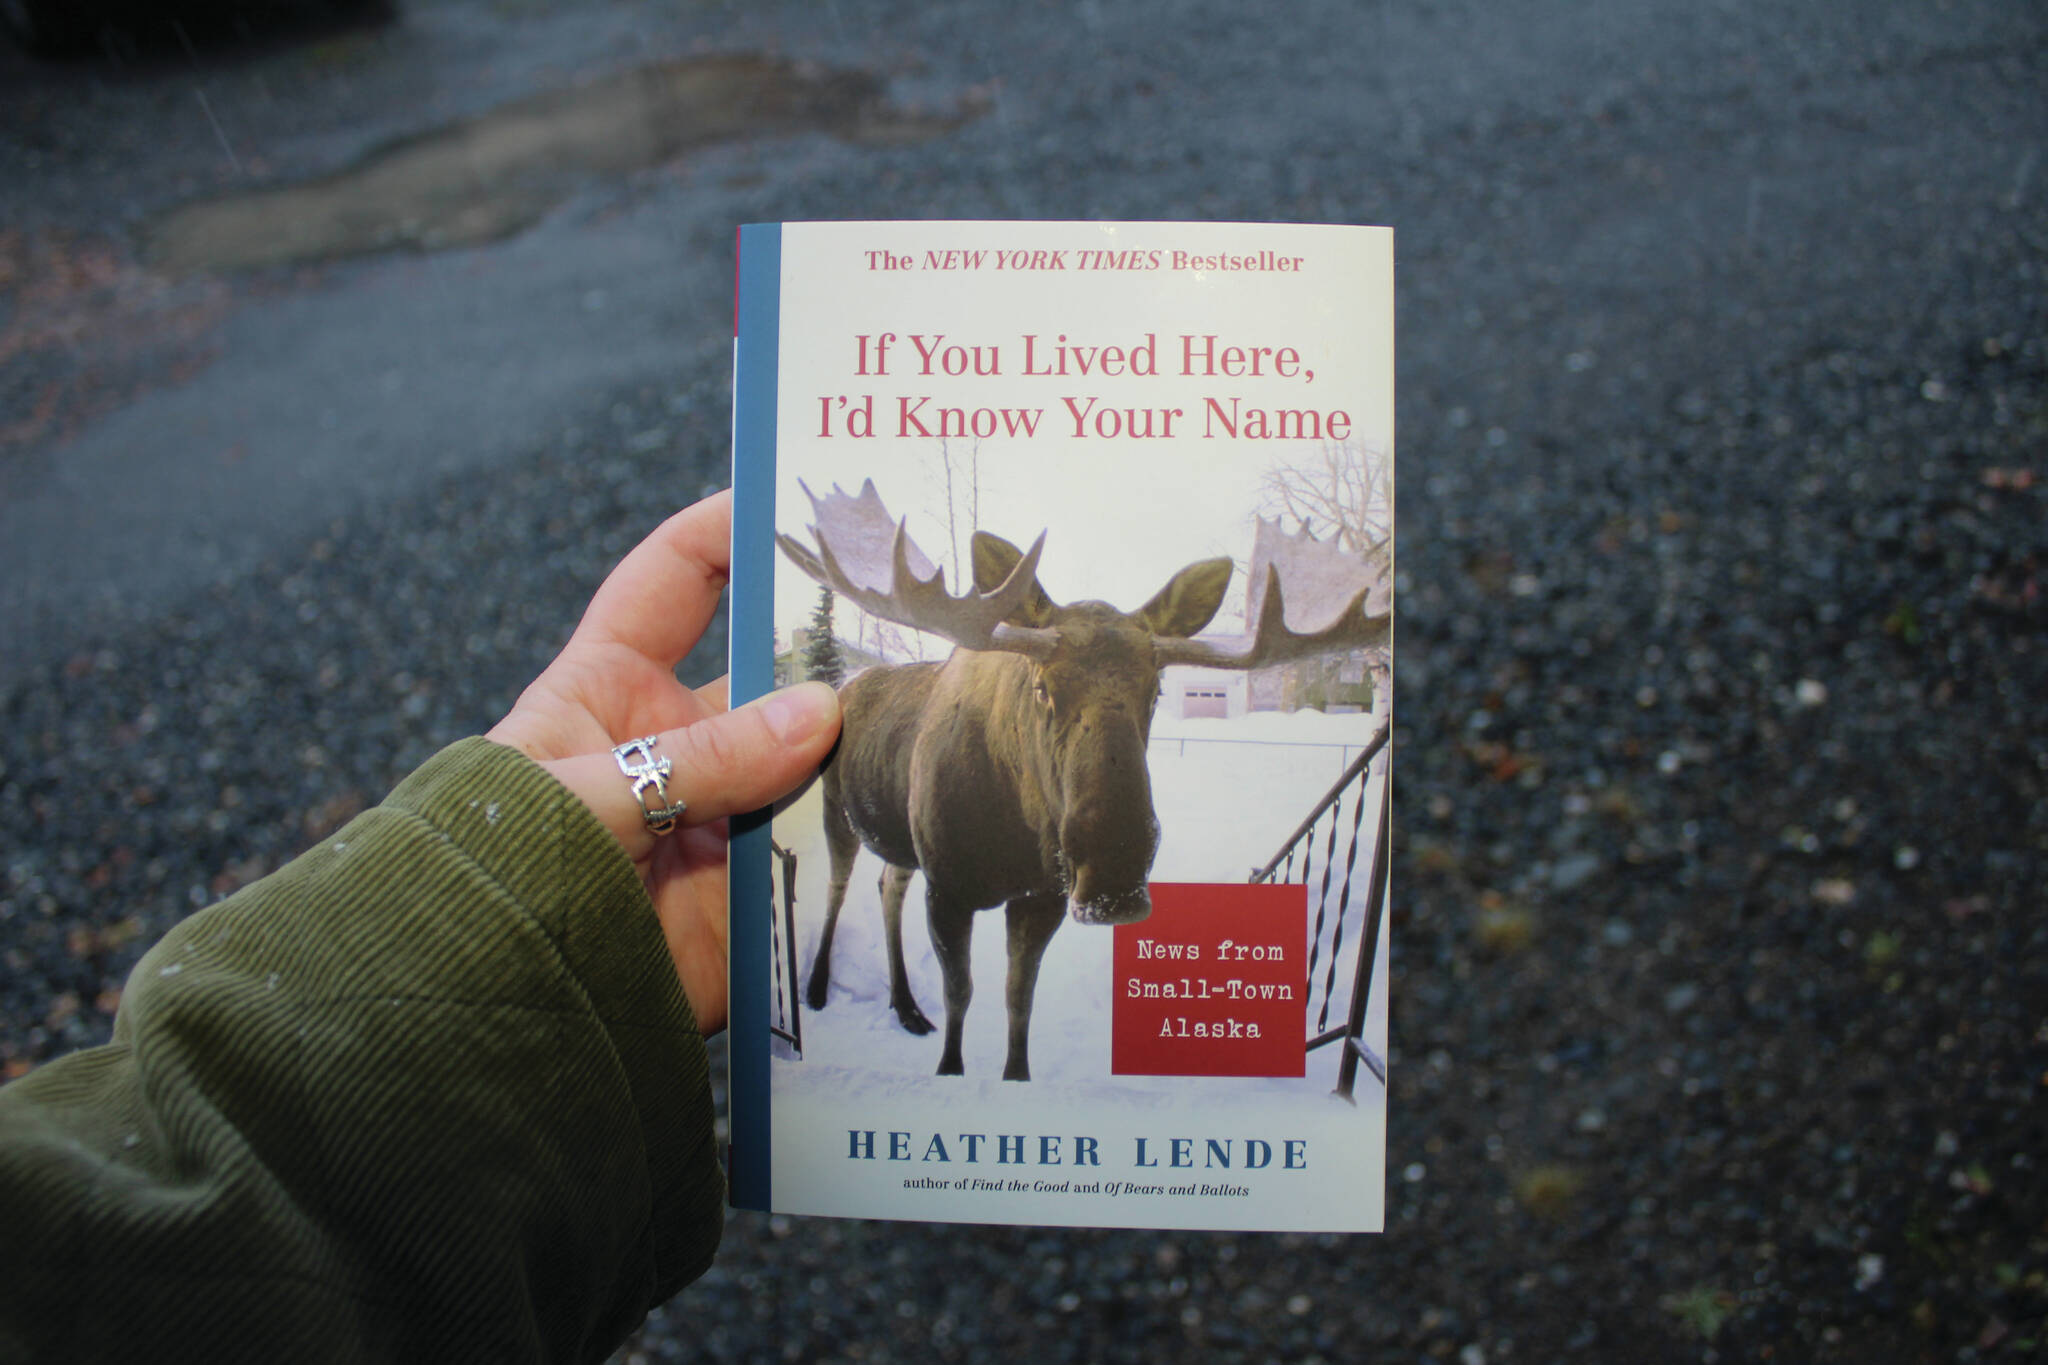 Ashlyn O’Hara/Peninsula Clarion
A copy of “If You Lived Here, I’d Know Your Name” is held on Thursday near Soldotna.